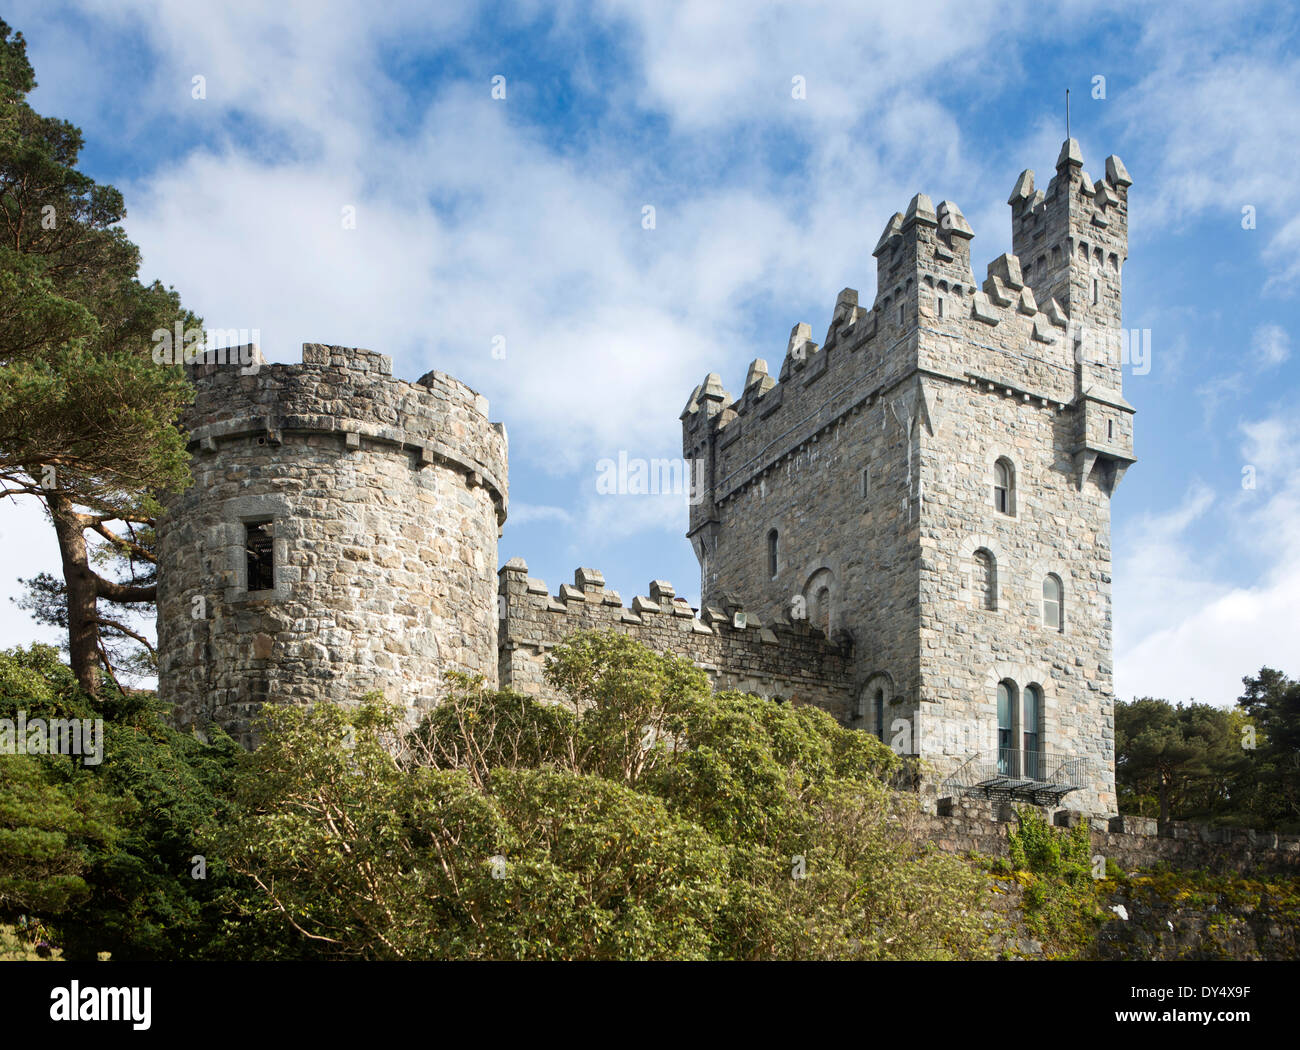 Irland, Co. Donegal, Glenveagh Castle Stockfoto